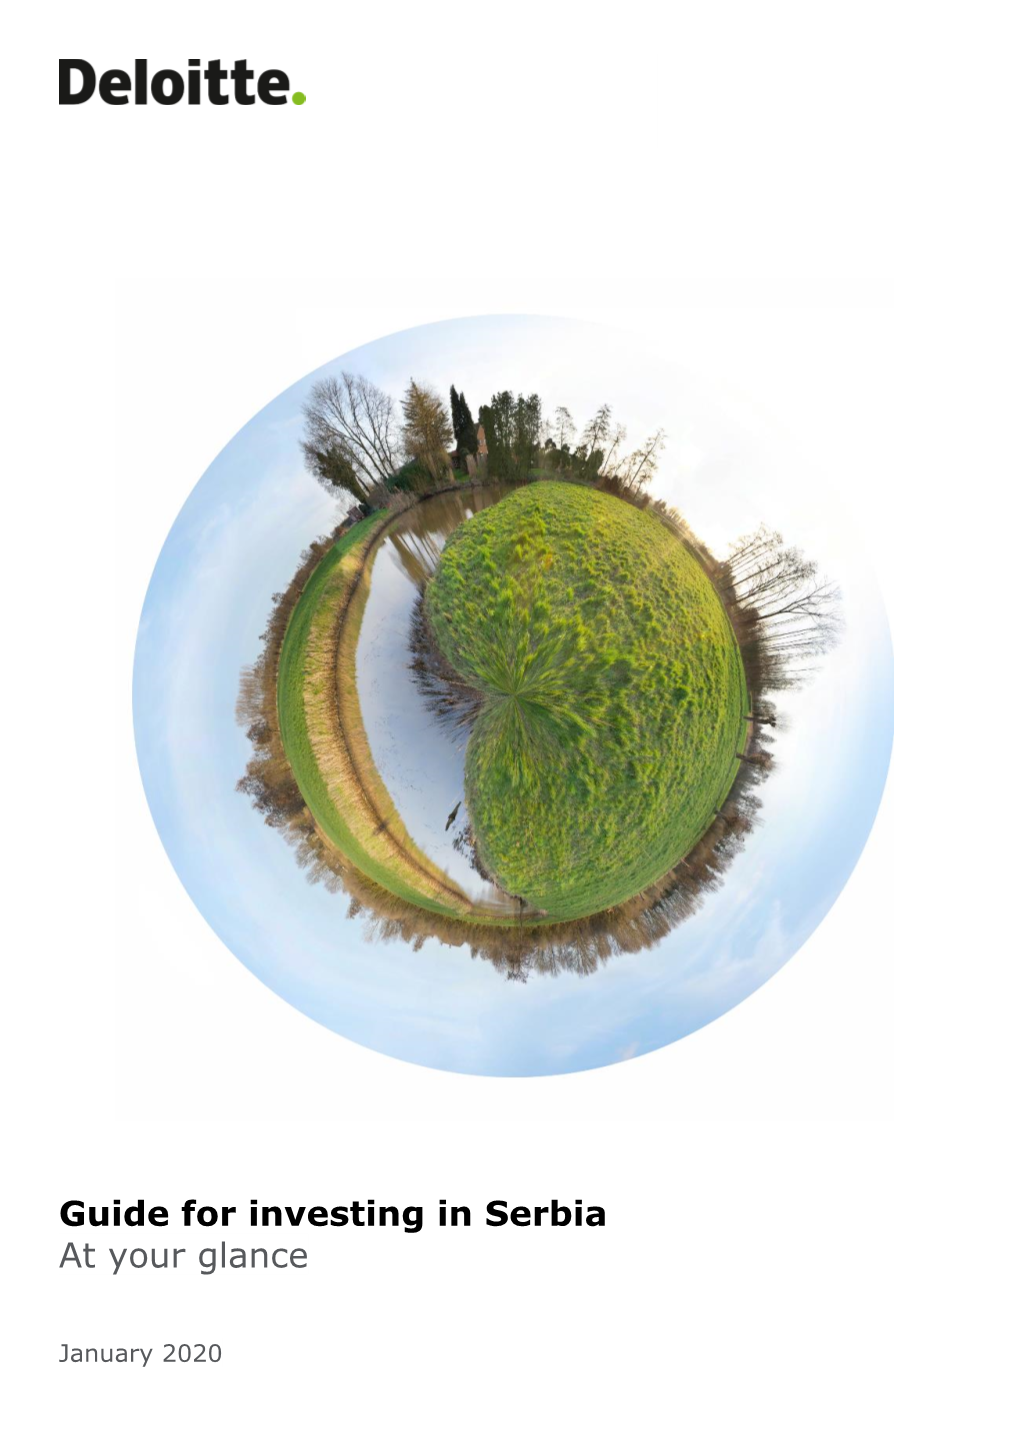 Guide for Investing in Serbia at Your Glance